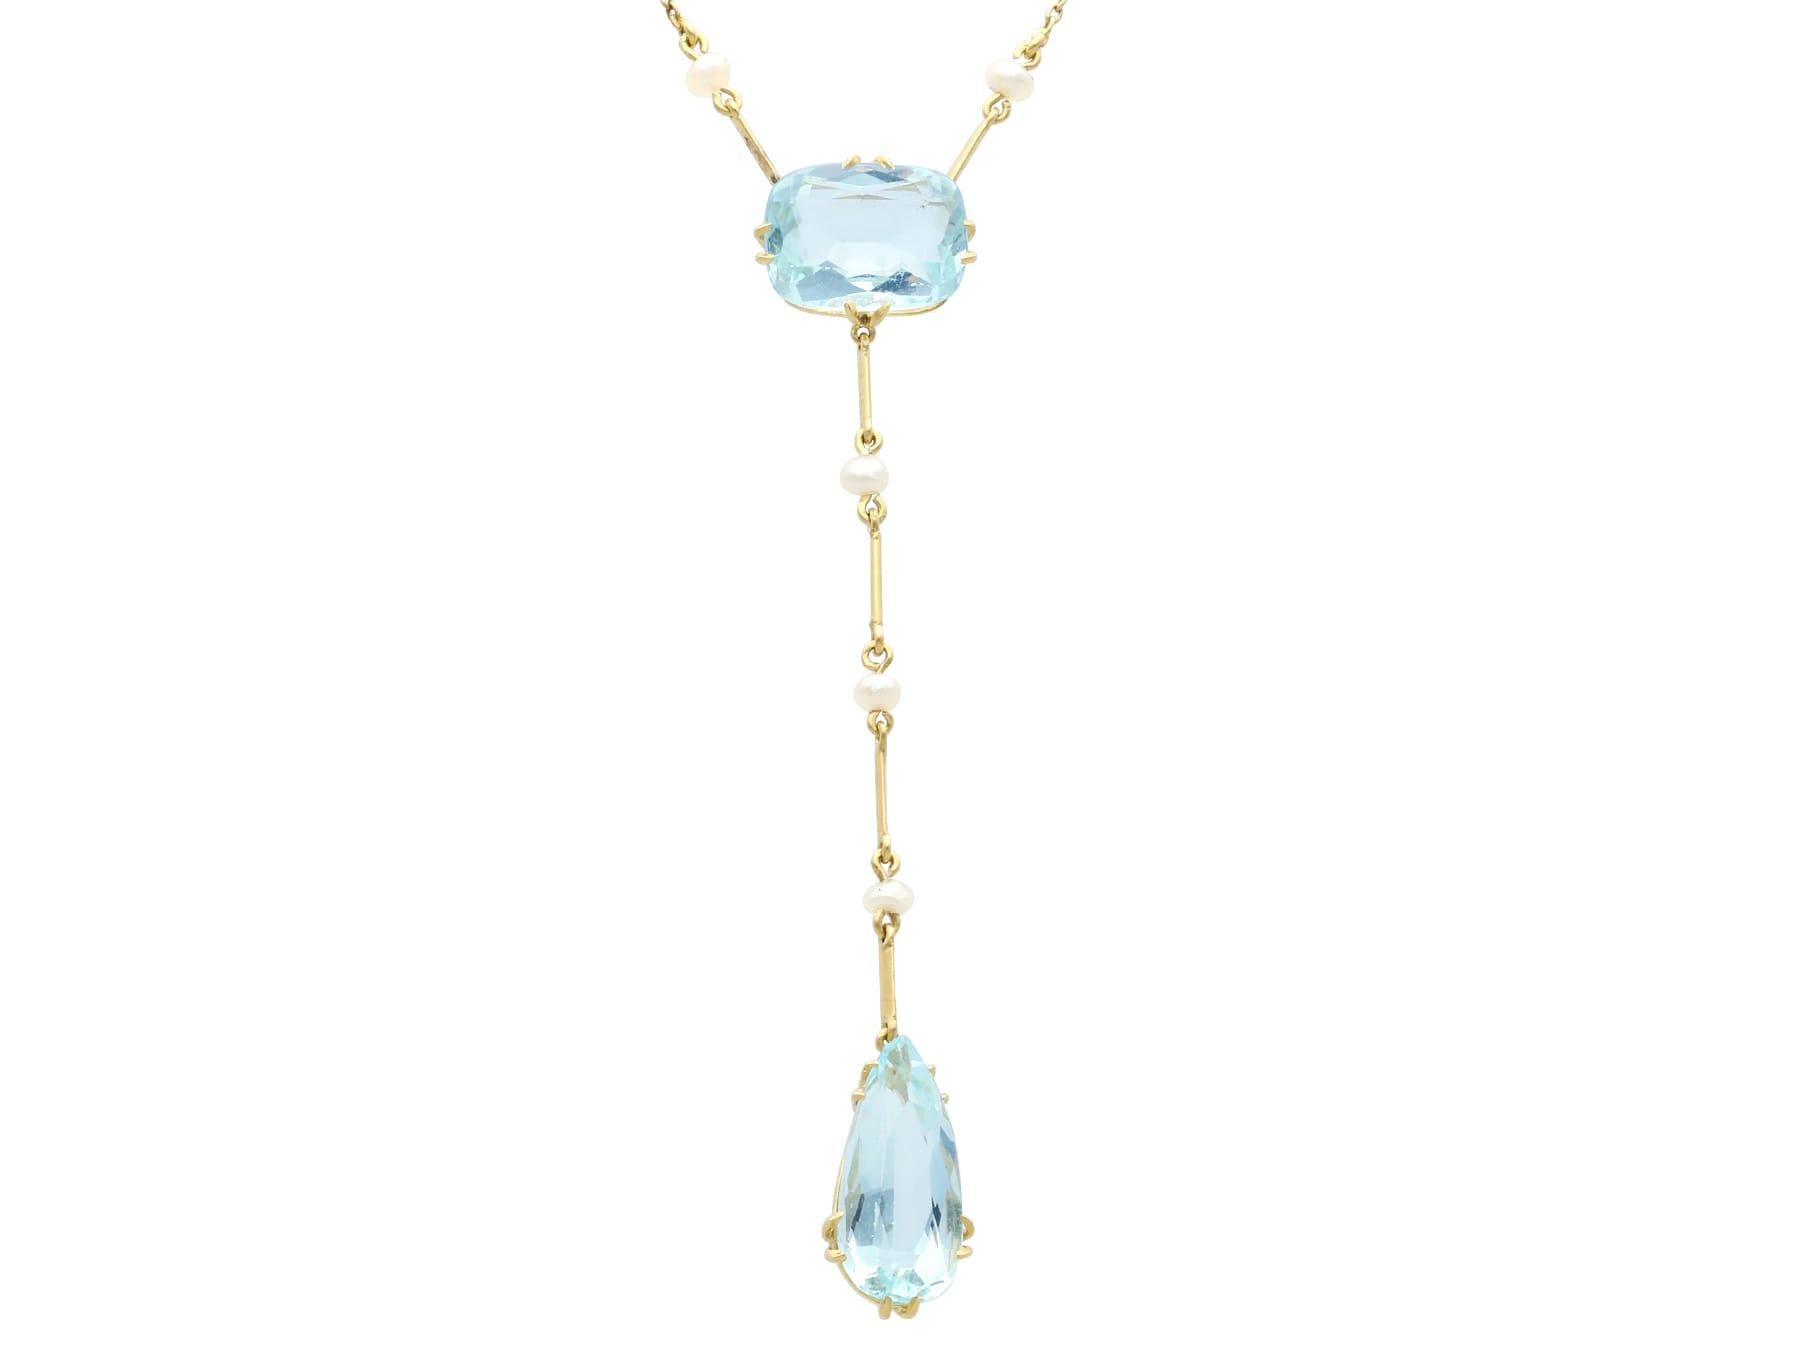 A stunning, fine and impressive antique 8.33 carat aquamarine, pearl and 15 carat yellow gold pendant - boxed; part of our diverse antique jewellery and estate jewelry collections

This stunning antique pendant has been crafted in 15ct yellow